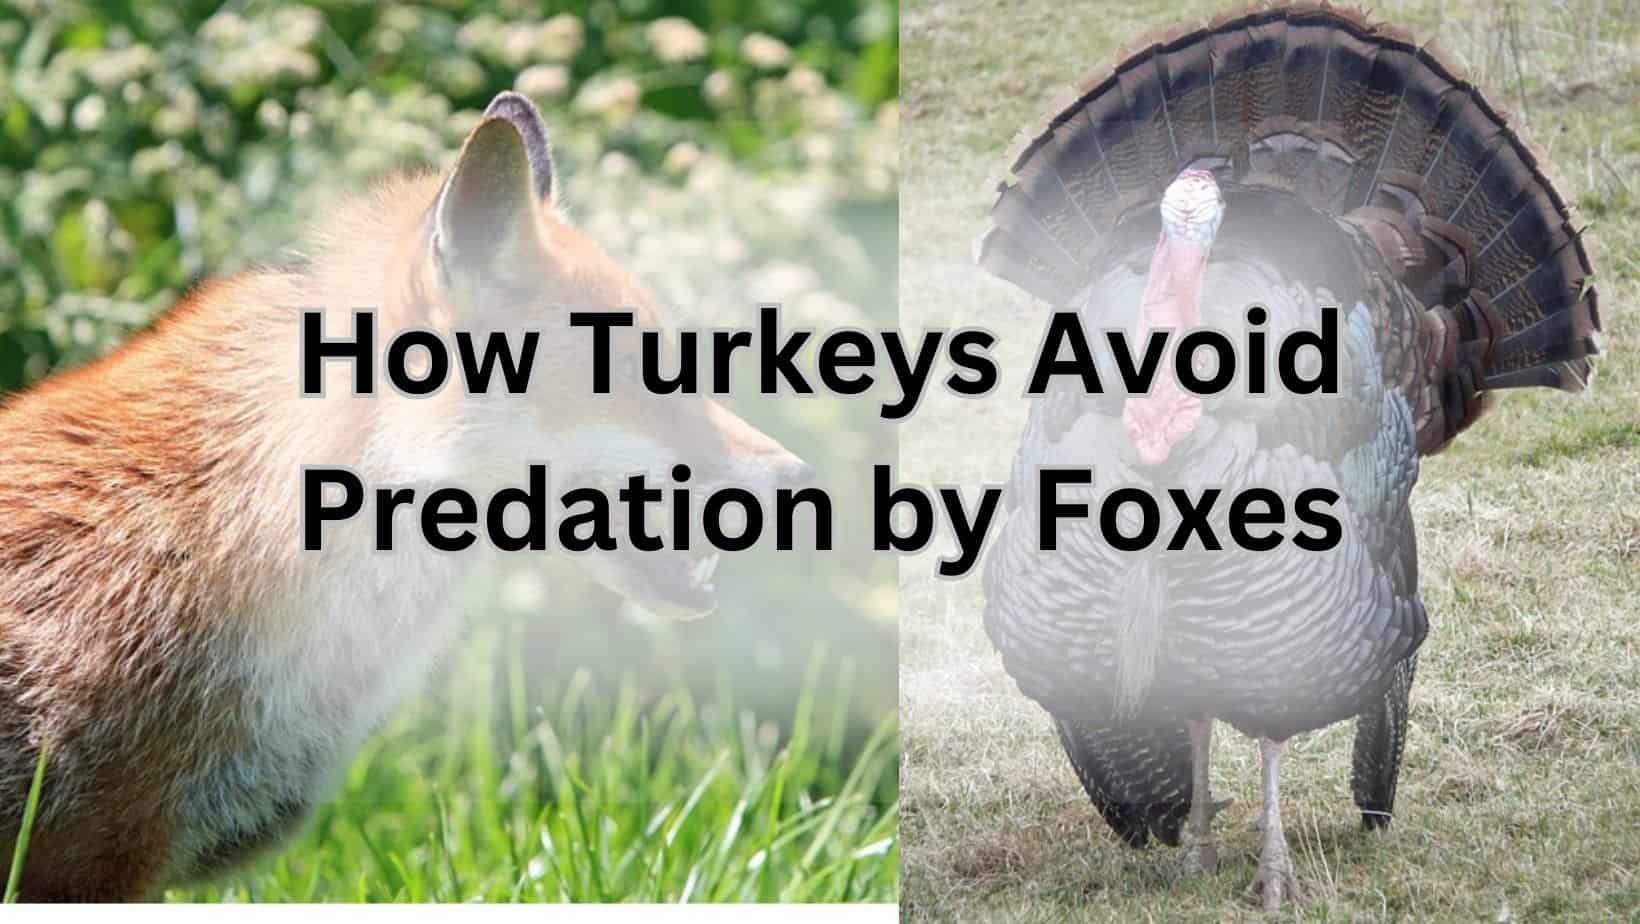 How Turkeys Avoid Predation by Foxes